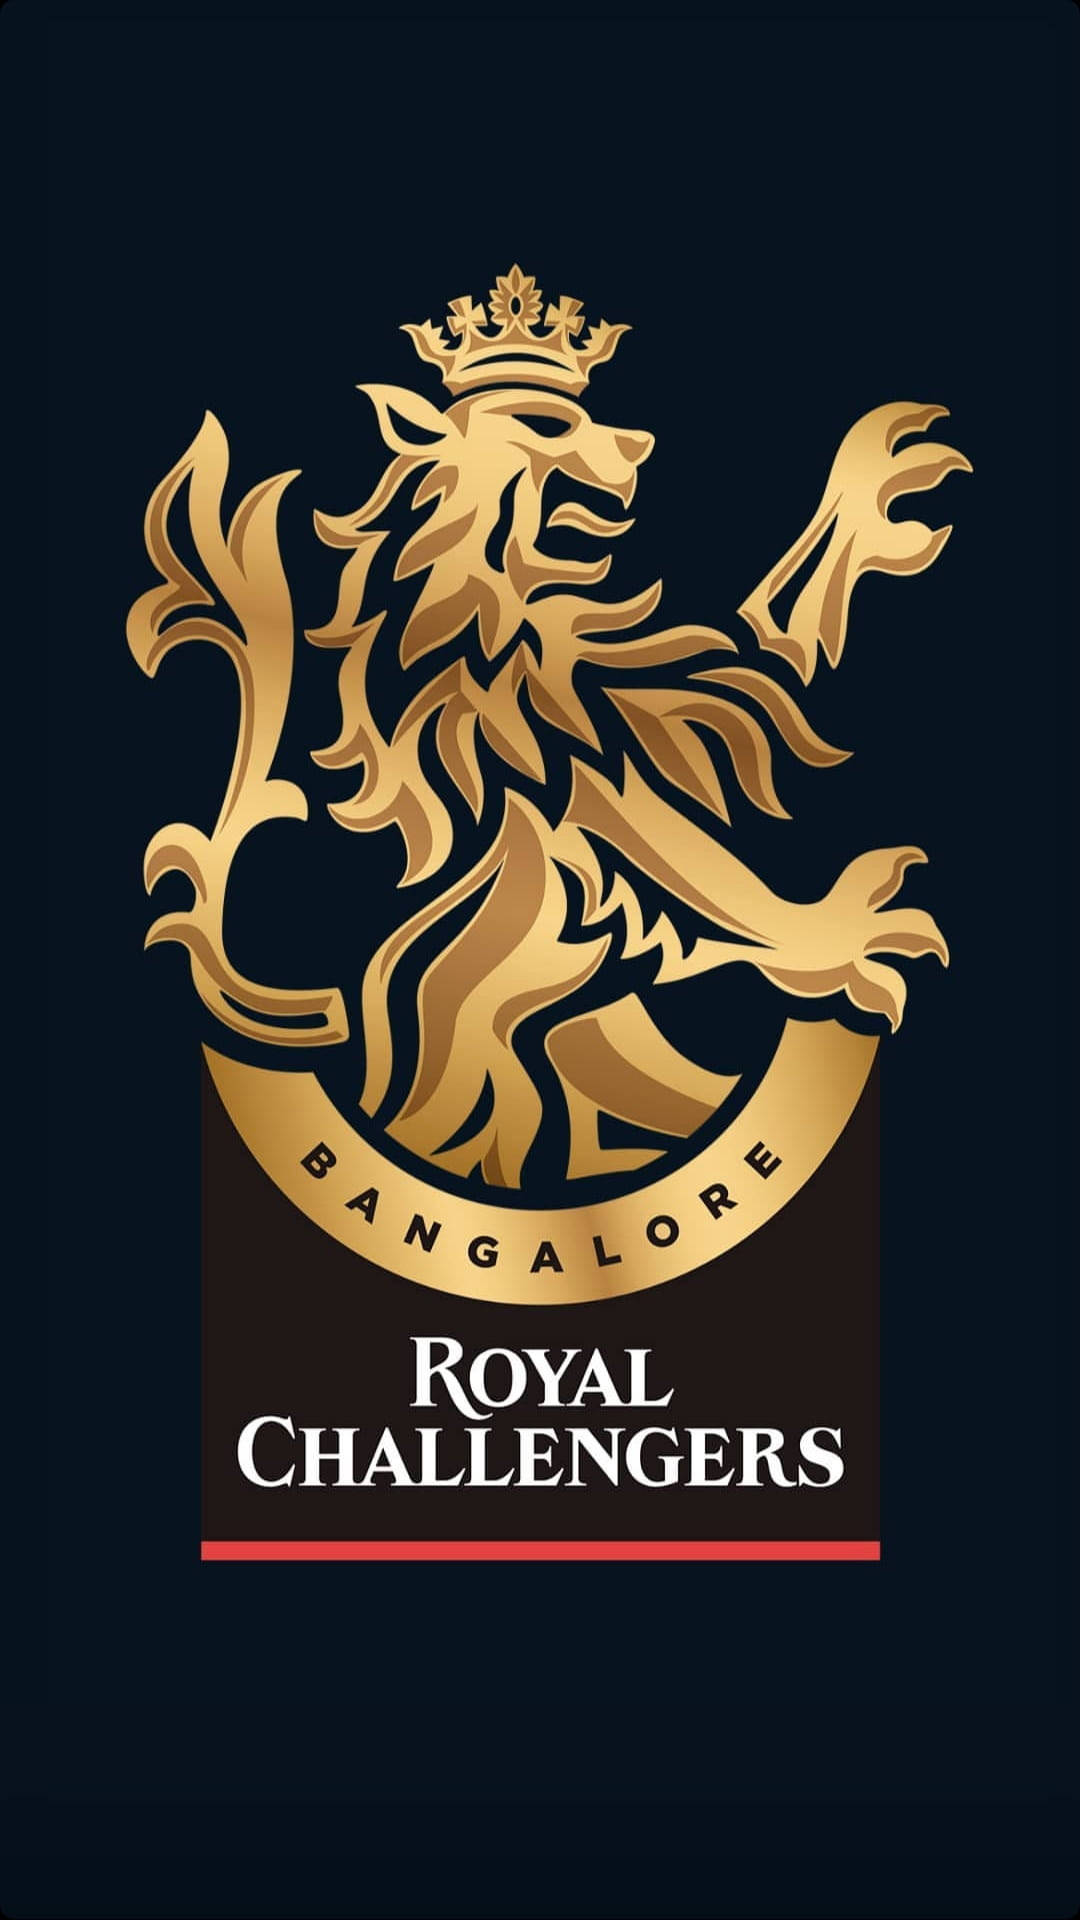 Royal Challengers Bangalore, The Prideful Golden Lion Logo. Background